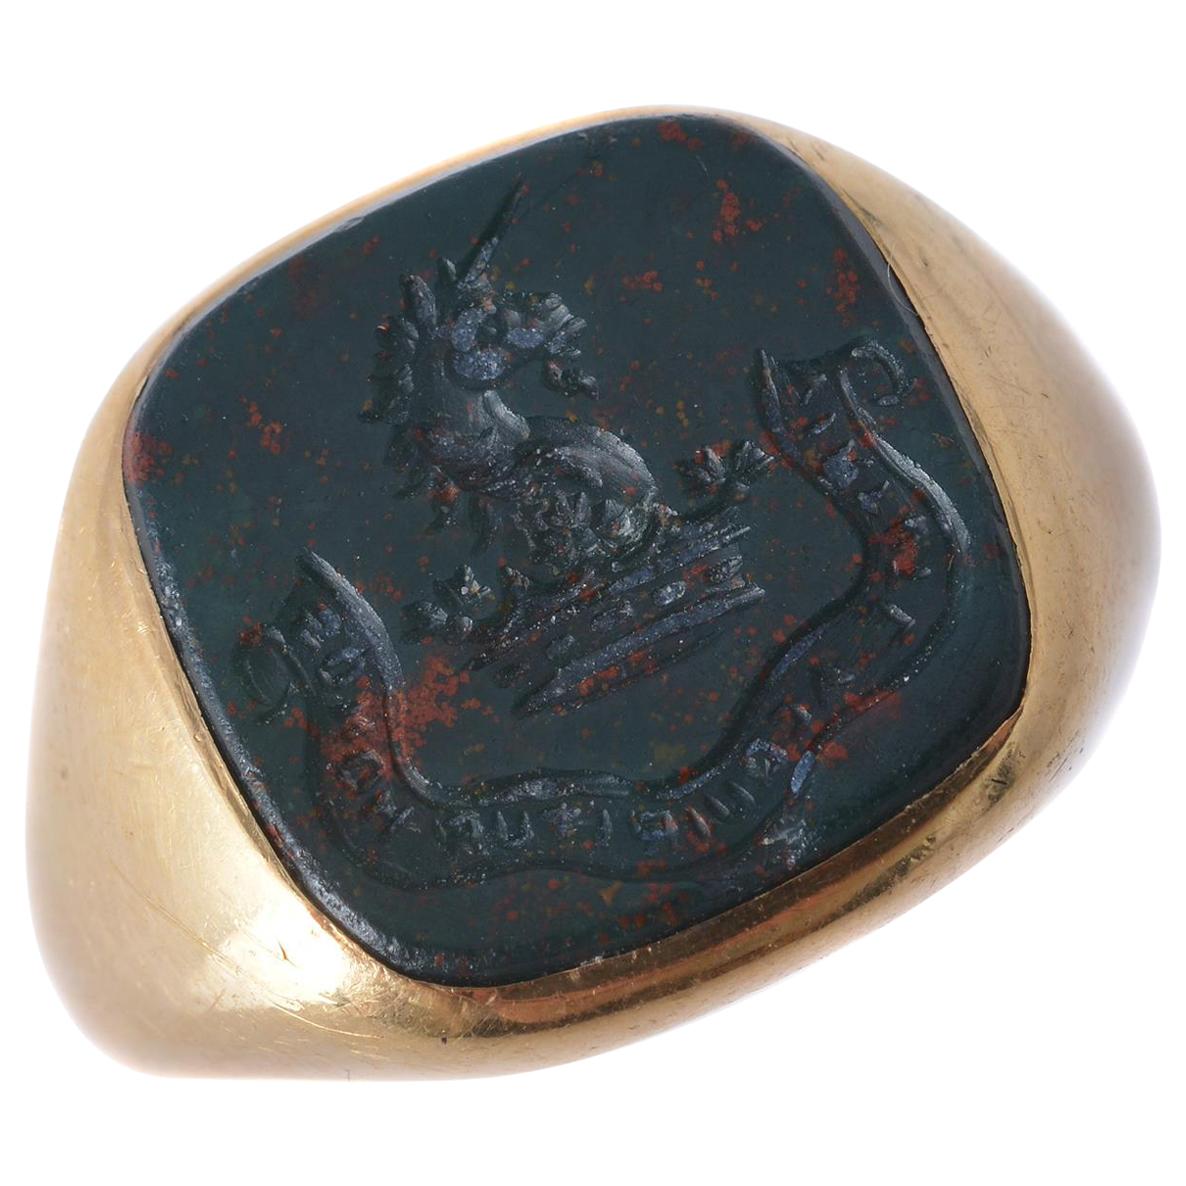 Early 20th Century Bloodstone Signet Ring